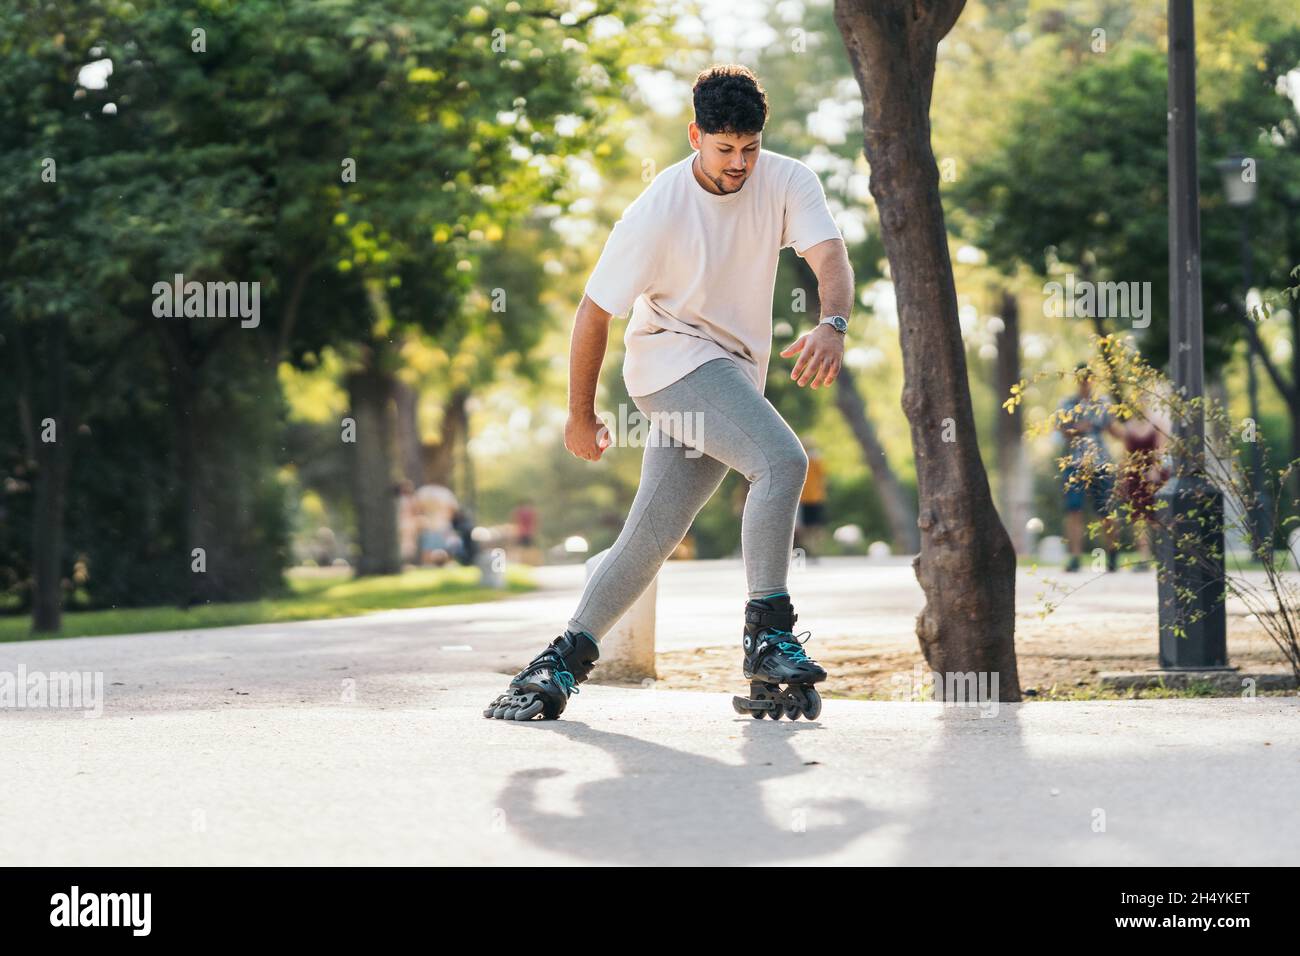 Man skating with inline skates in a paved path of a park Stock Photo